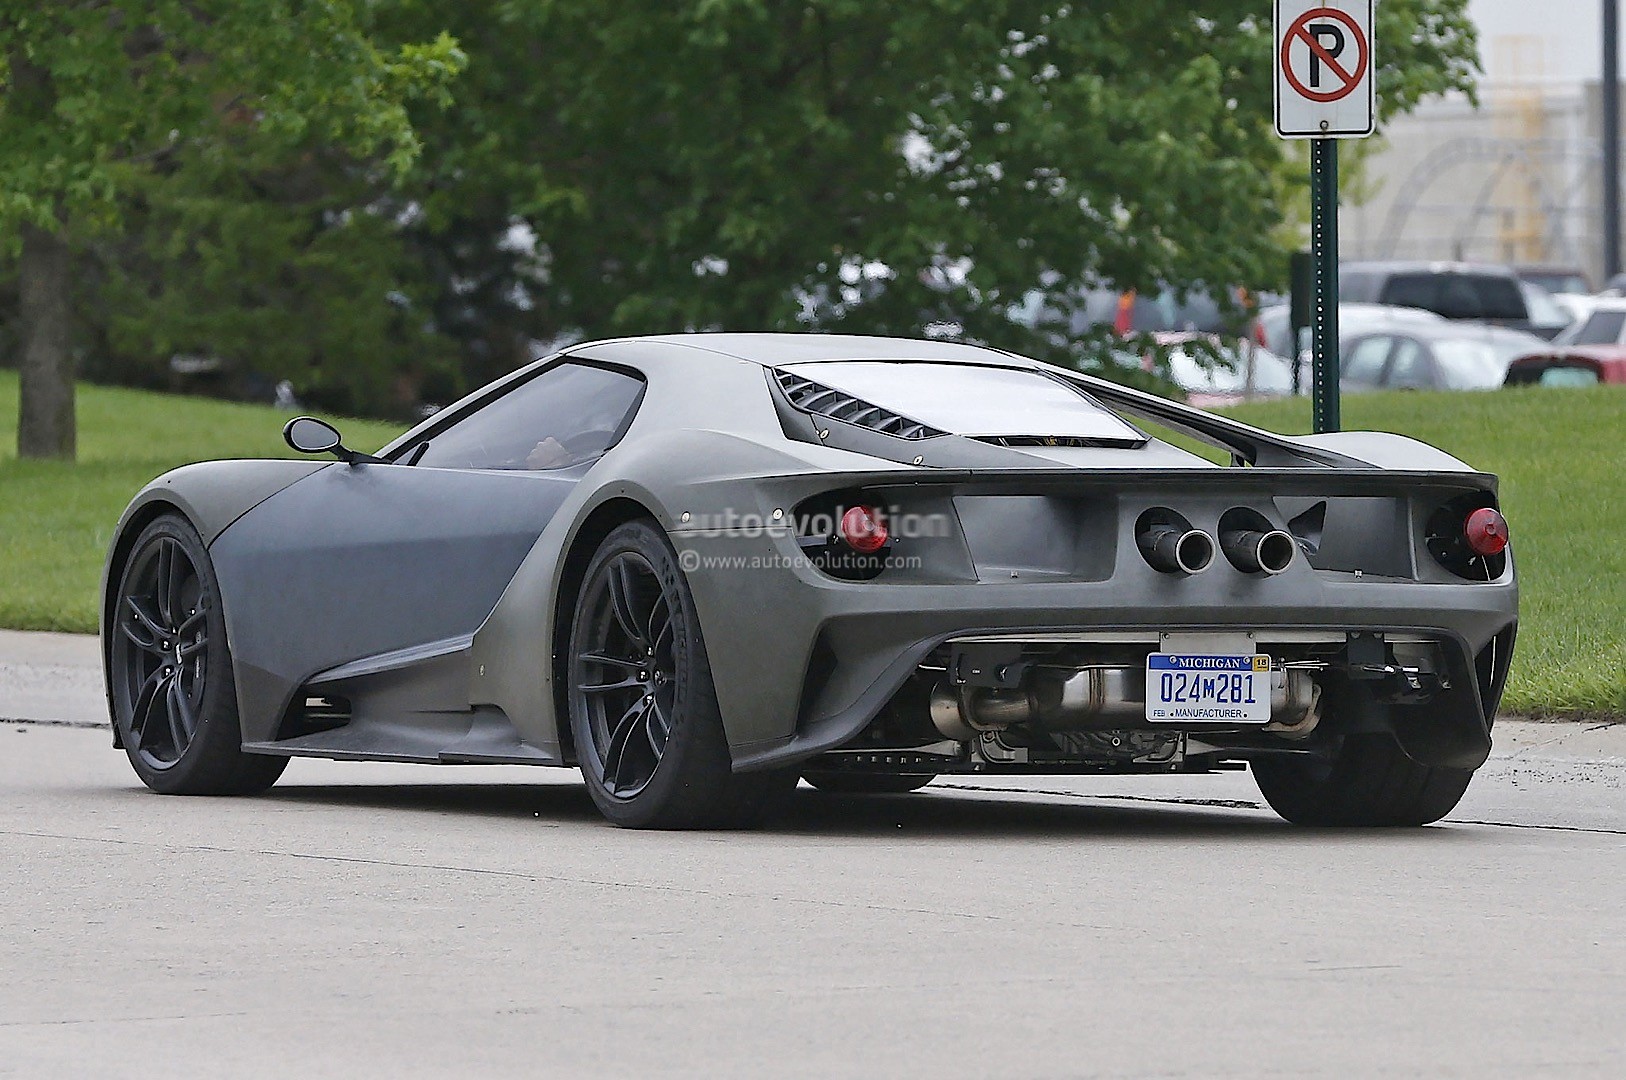 2017-ford-gt-test-mule-spied-looks-apocalyptic-sans-paint-photo-gallery_10.jpg